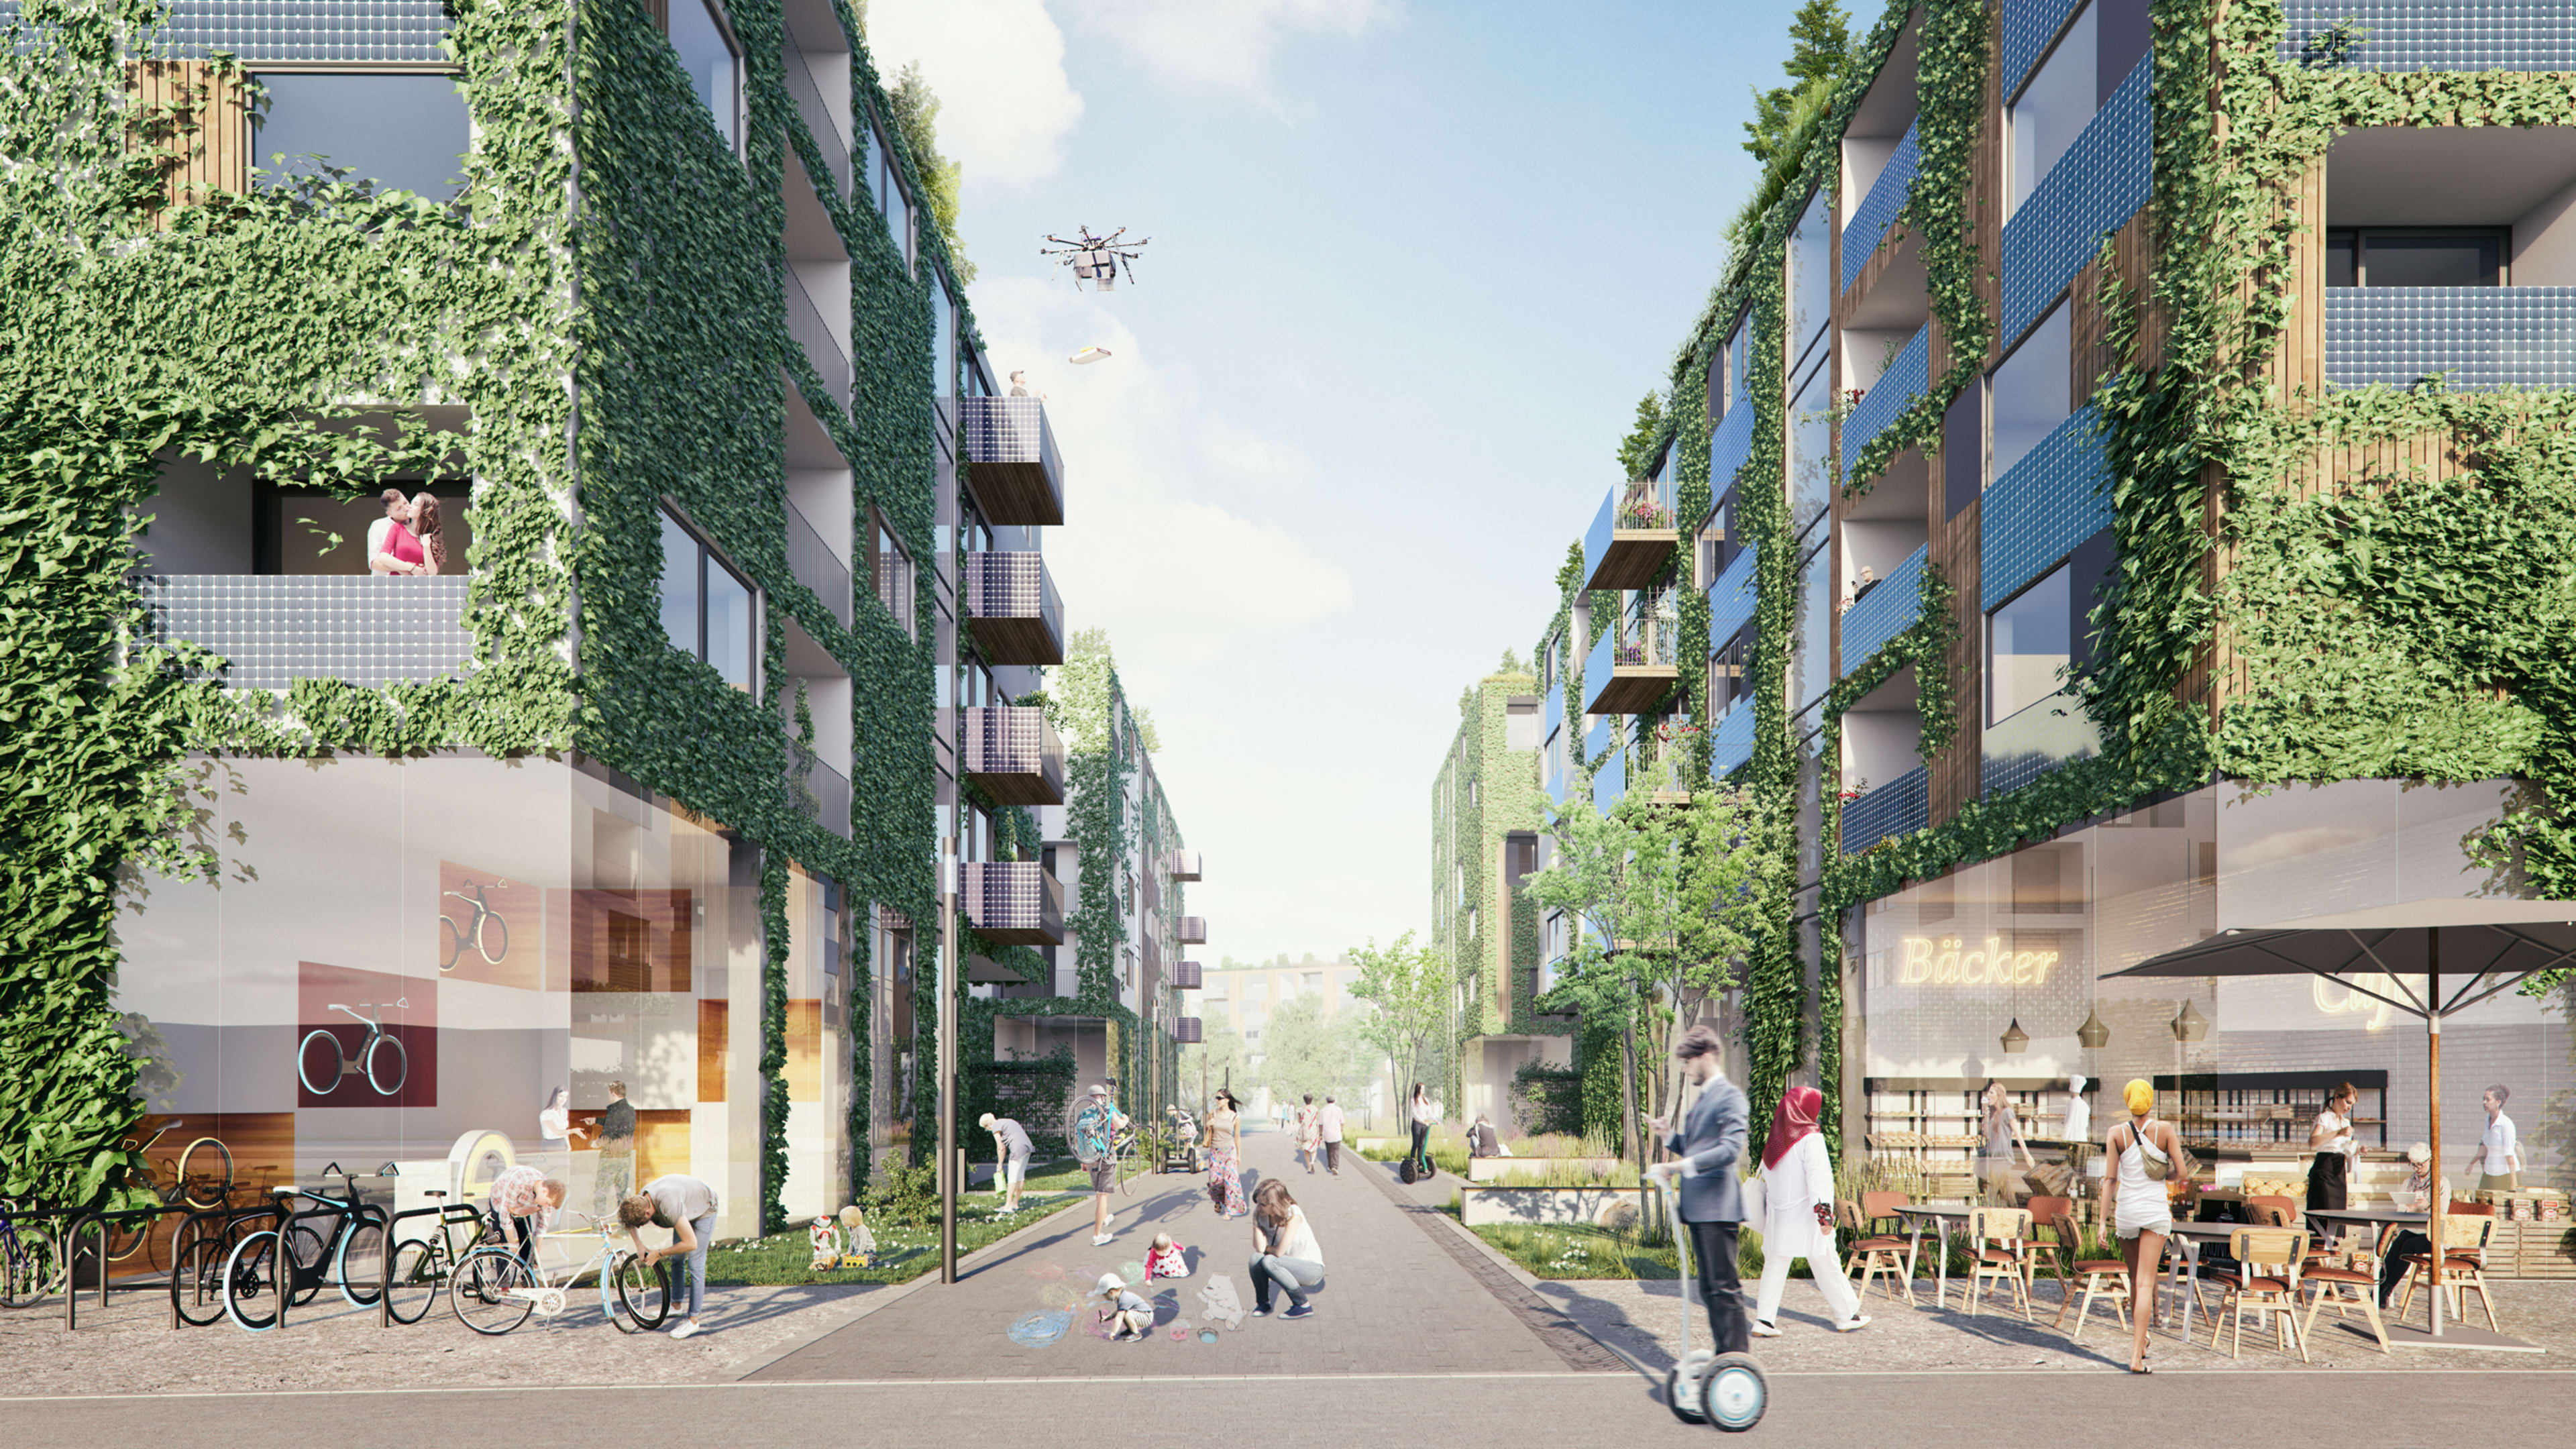 An abandoned Berlin airport is being transformed into a climate-neutral, car-free neighborhood